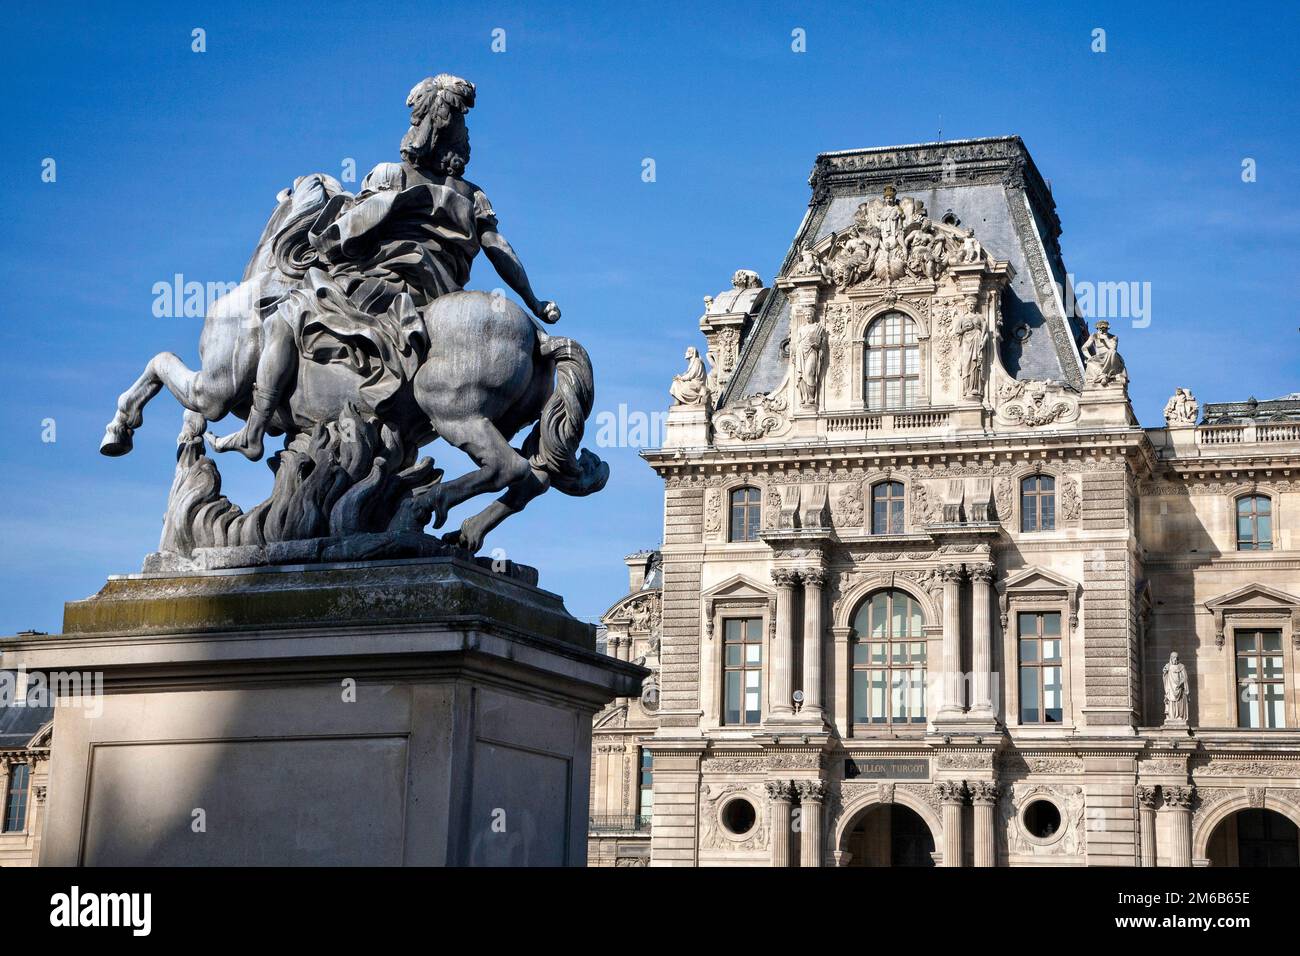 The exterior facade and statue at the world famous Louvre museum in  Paris, France. Stock Photo